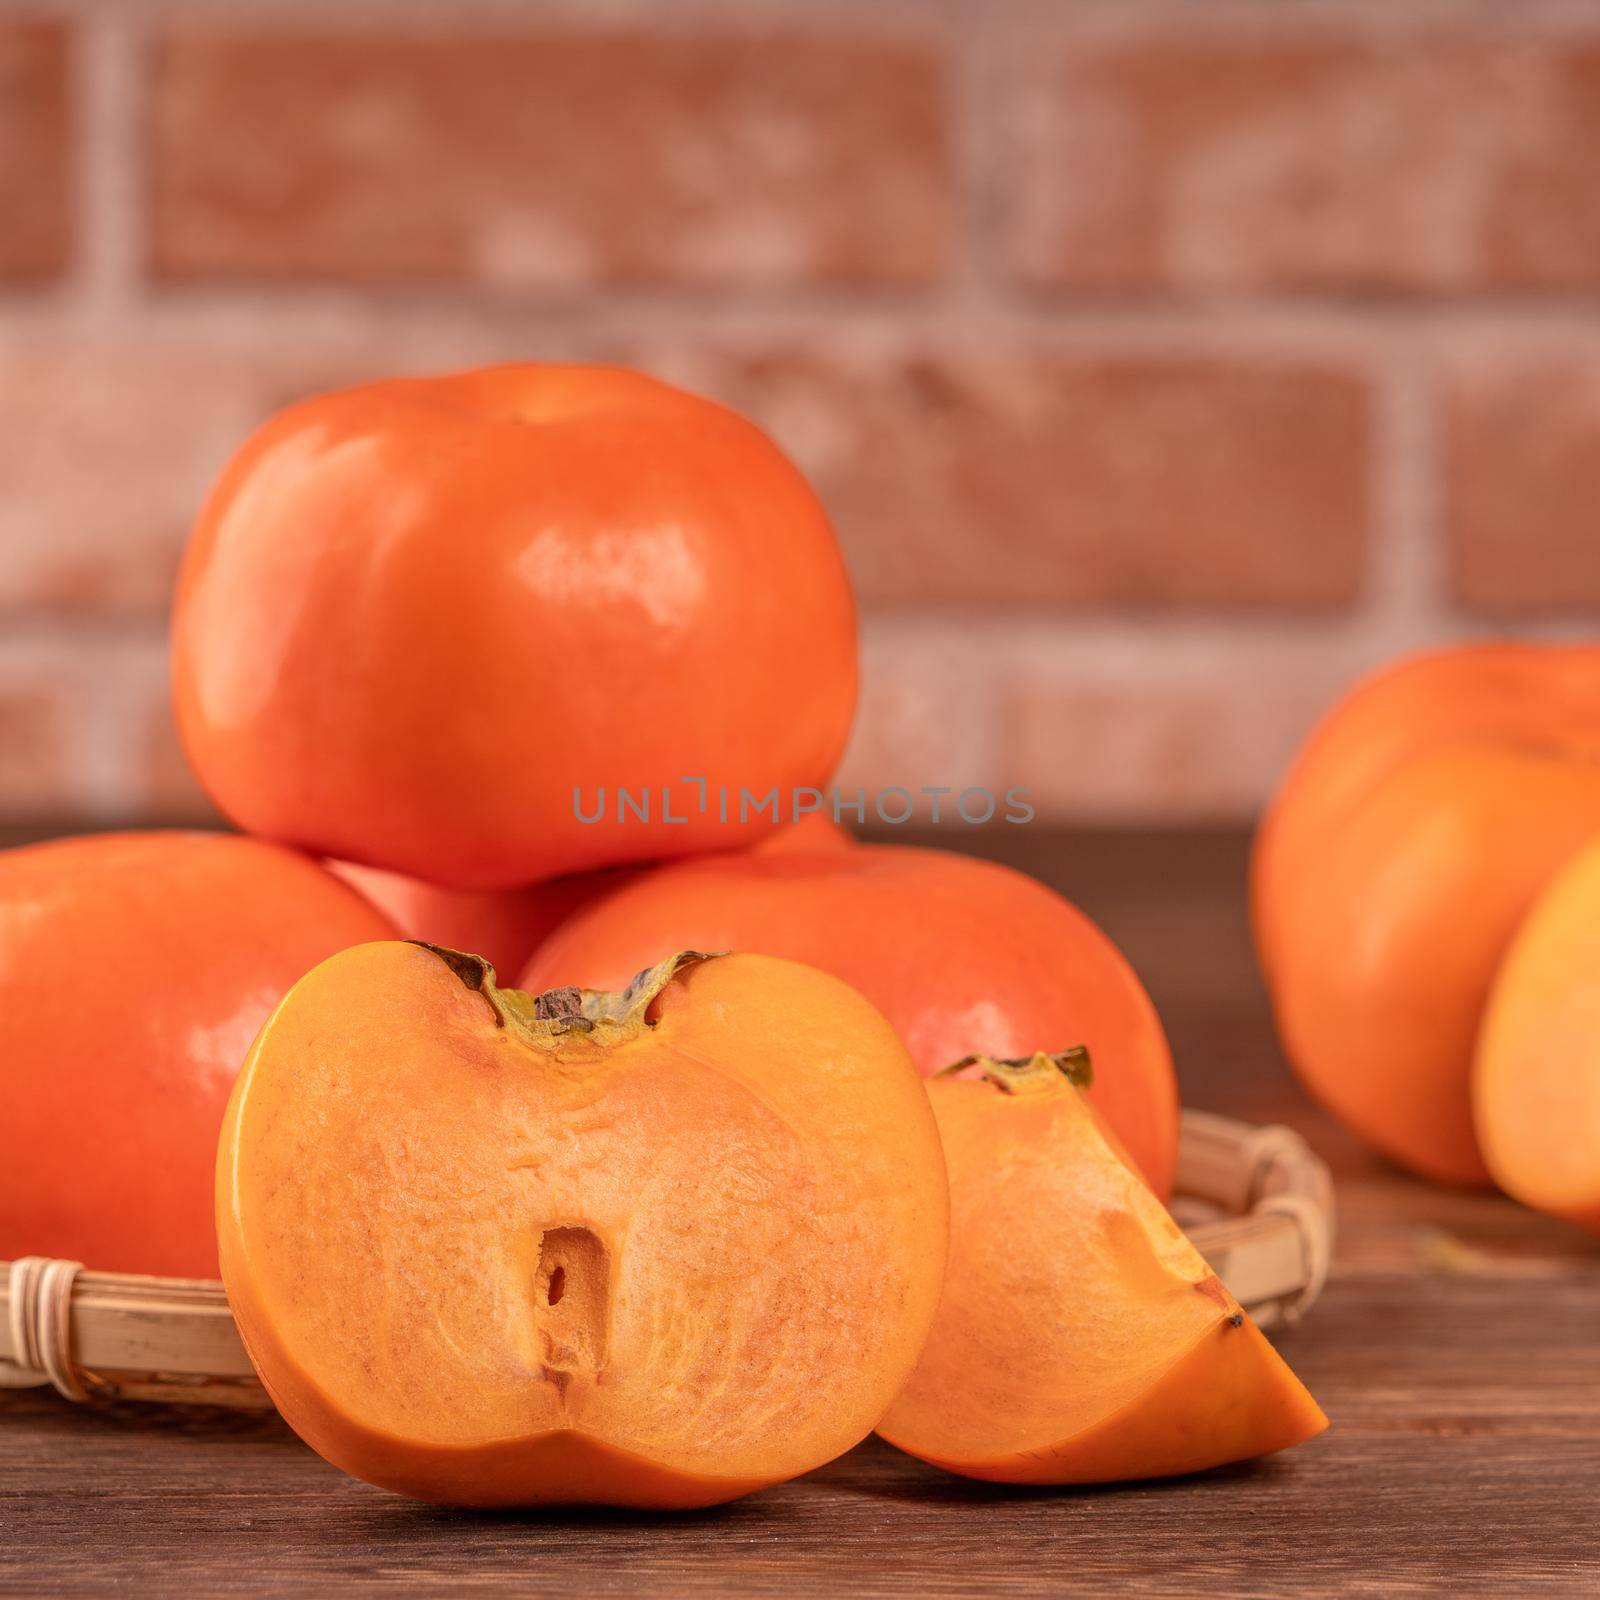 Fresh beautiful sliced sweet persimmon kaki on dark wooden table with red brick wall background, Chinese lunar new year fruit design concept, close up.